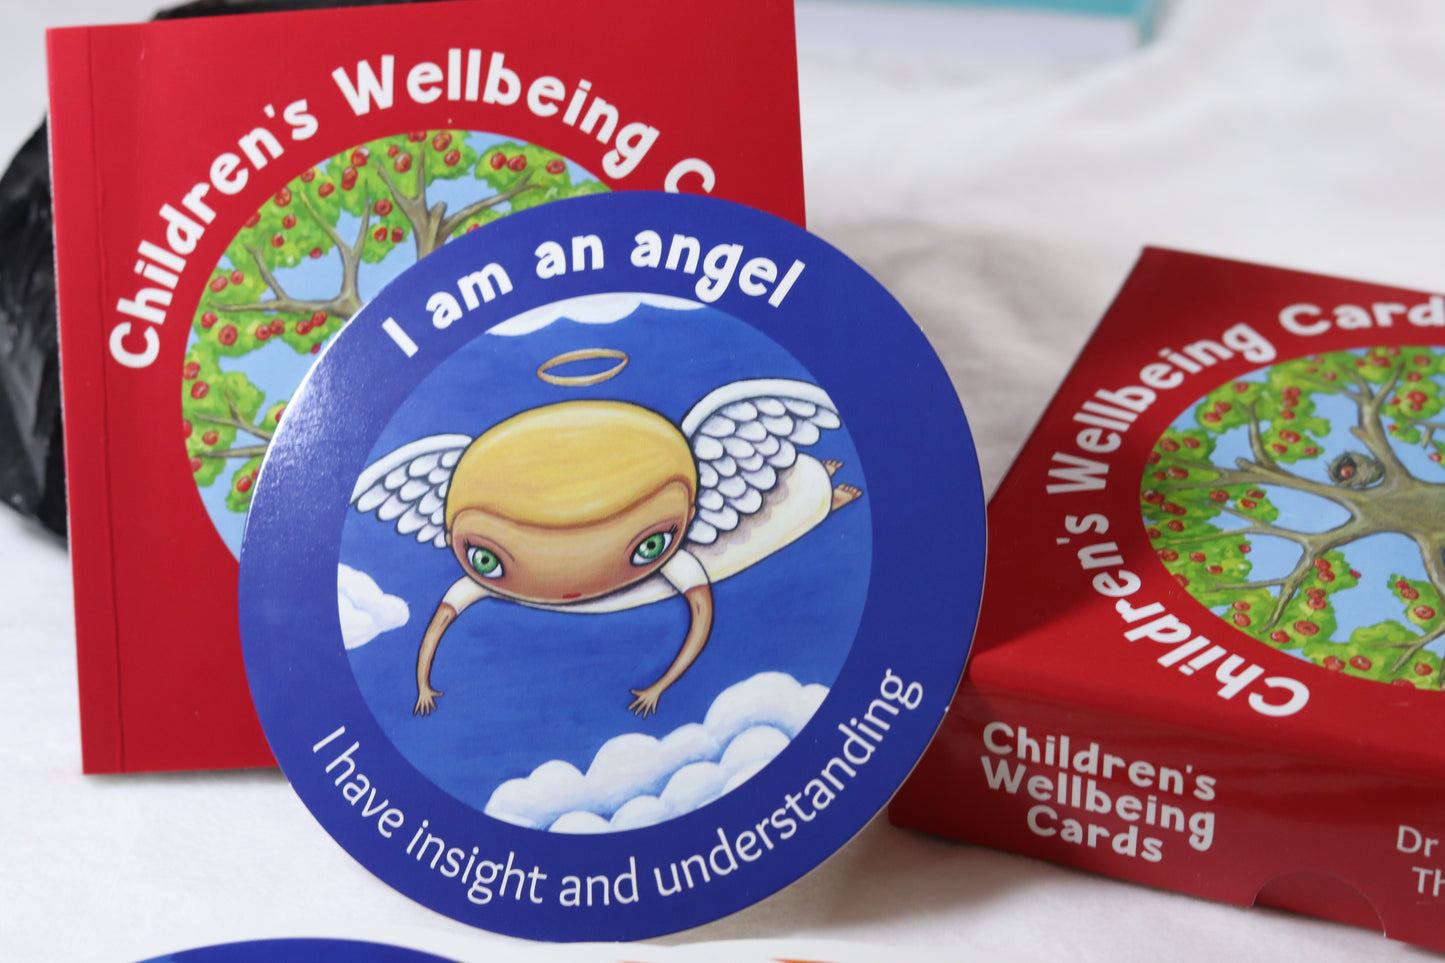 Well-Being cards for children